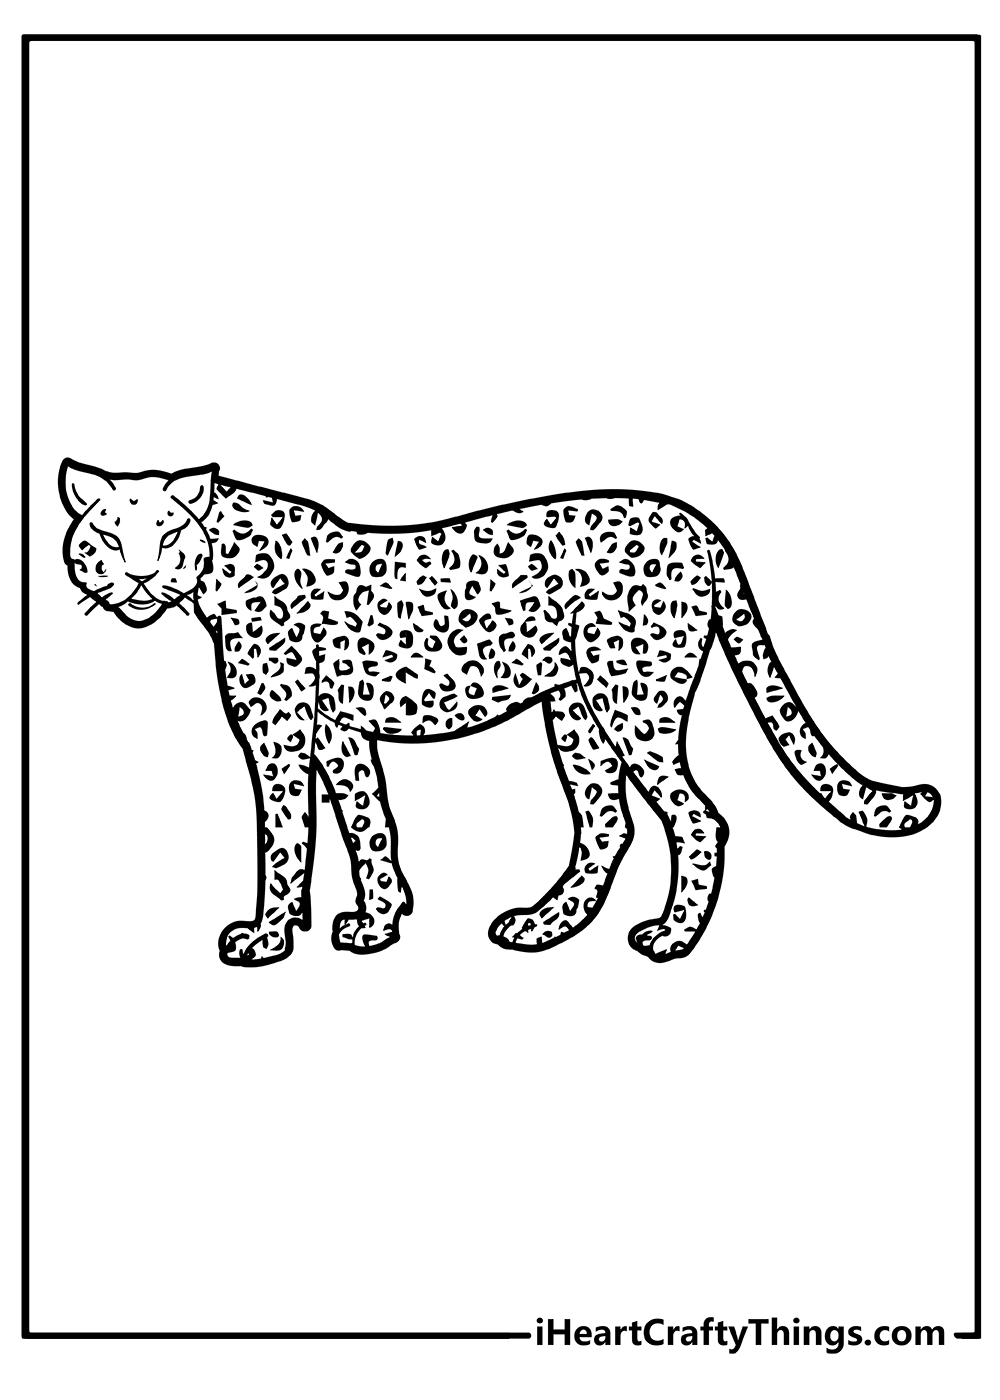 Cheetah Coloring Pages free download